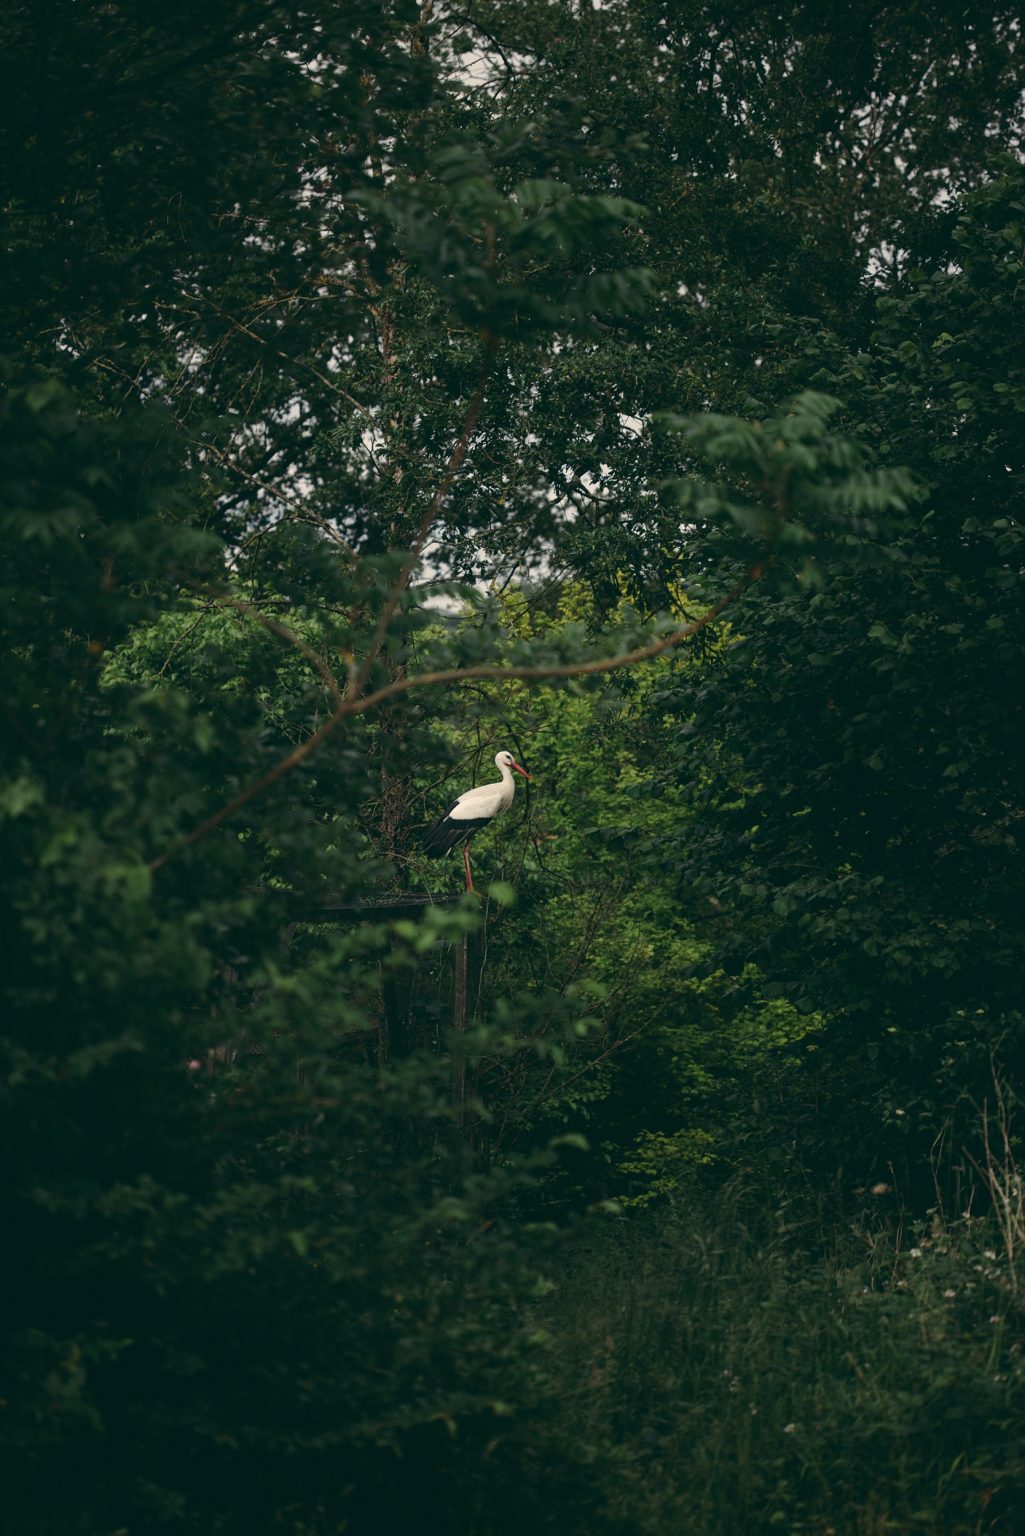 Bonneuil-Matours, France, May 2019 - La Maison Neuve. The white stork Mildred in the woods behind Tristan's house. >< 
Bonneuil-Matours,, Francia, maggio 2019 - La cicogna bianca Mildred nel bosco dietro la casa di Tristan.*** SPECIAL   FEE   APPLIES *** *** Local Caption *** 01489362